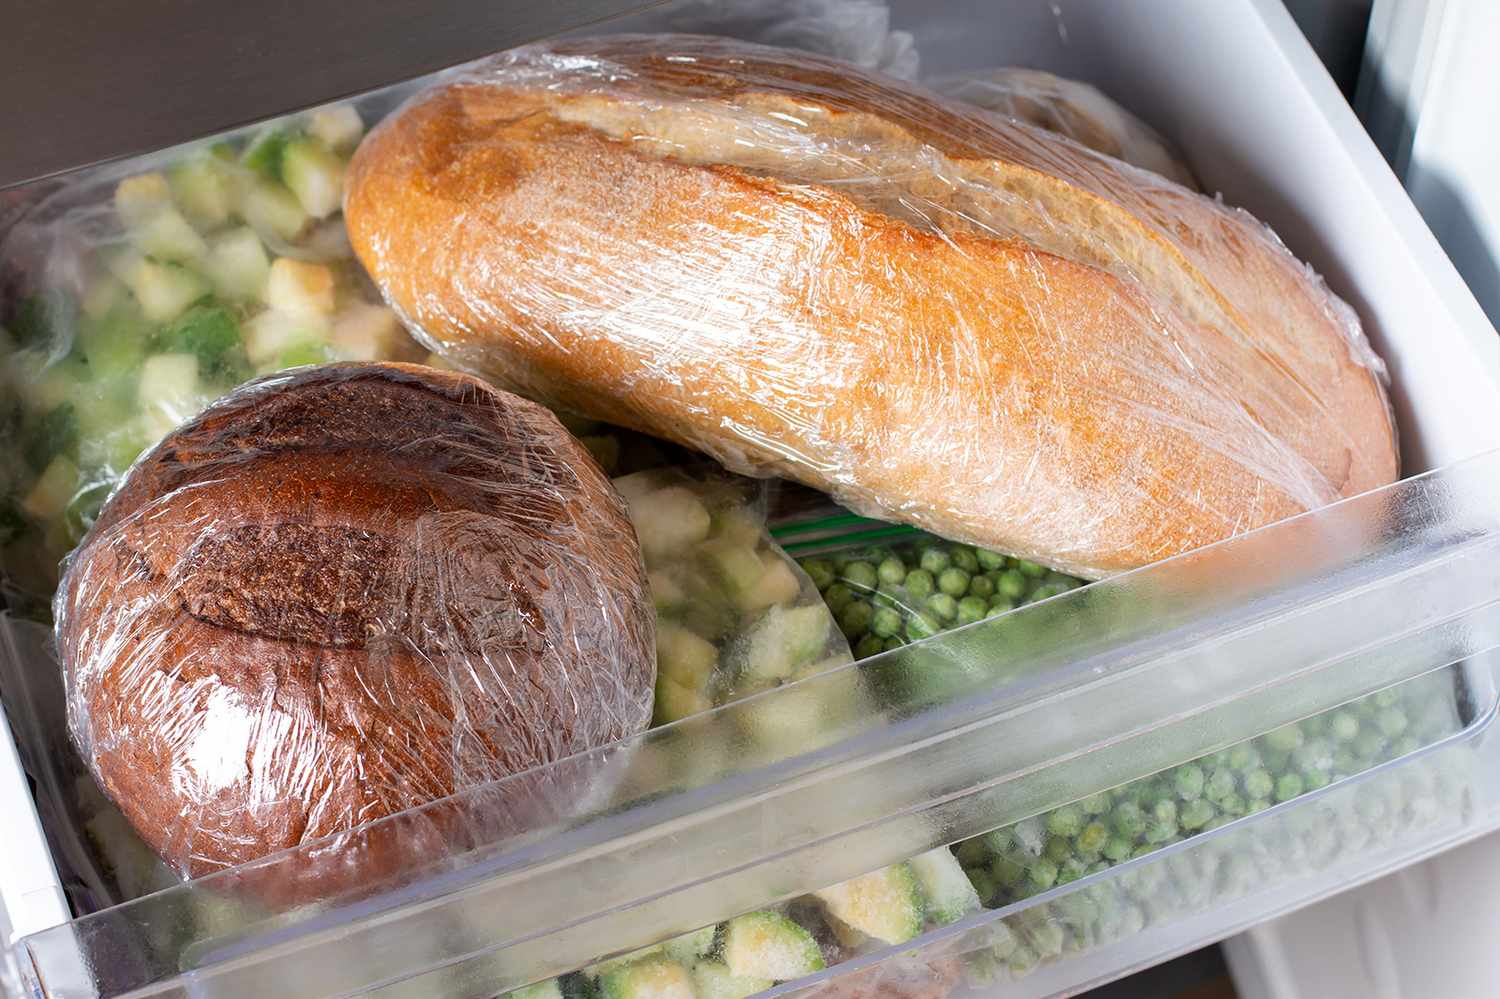 How To Store Bread To Prevent Mold